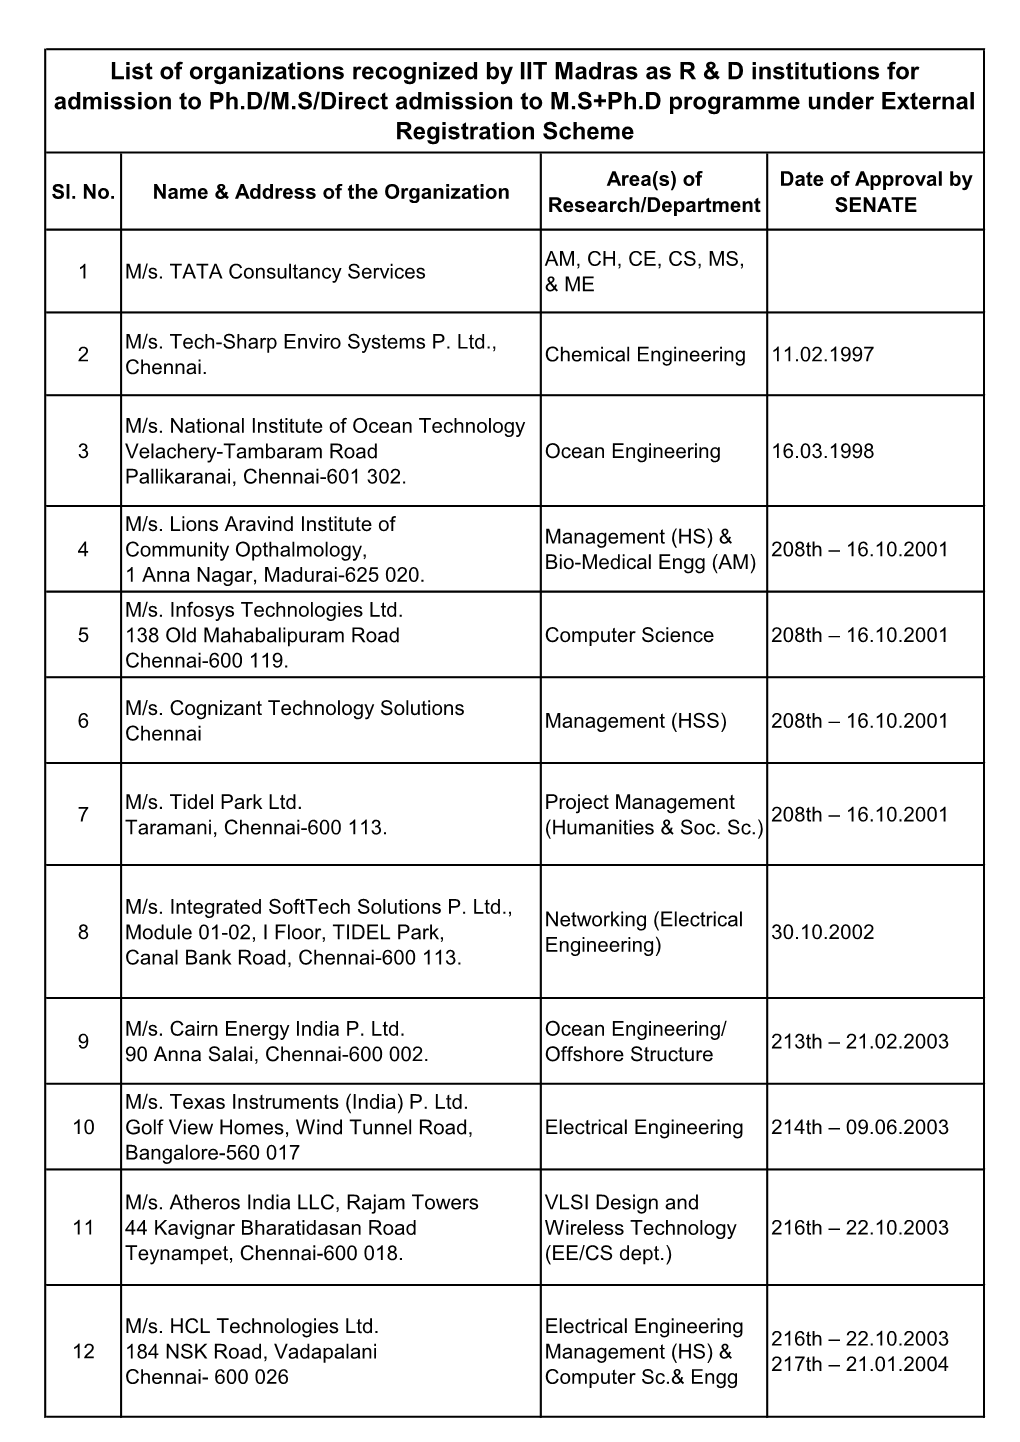 List of Organizations Recognized by IIT Madras As R & D Institutions For